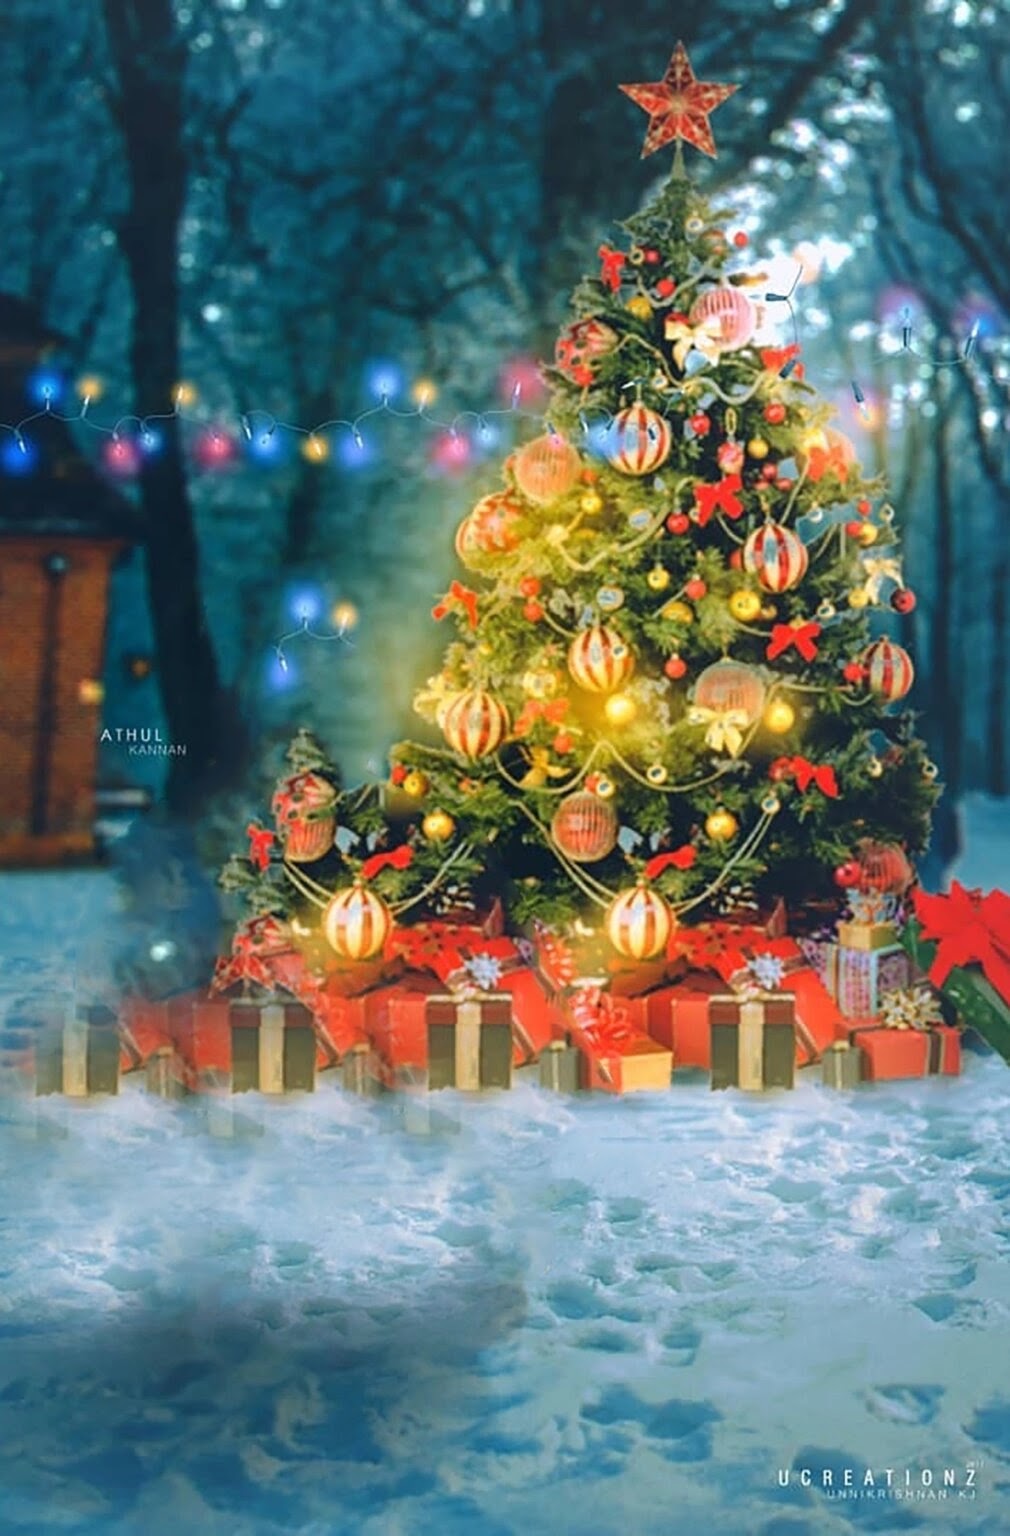 500+ Happy Christmas Editing Background Images | Christmas Background Images for Editing Download